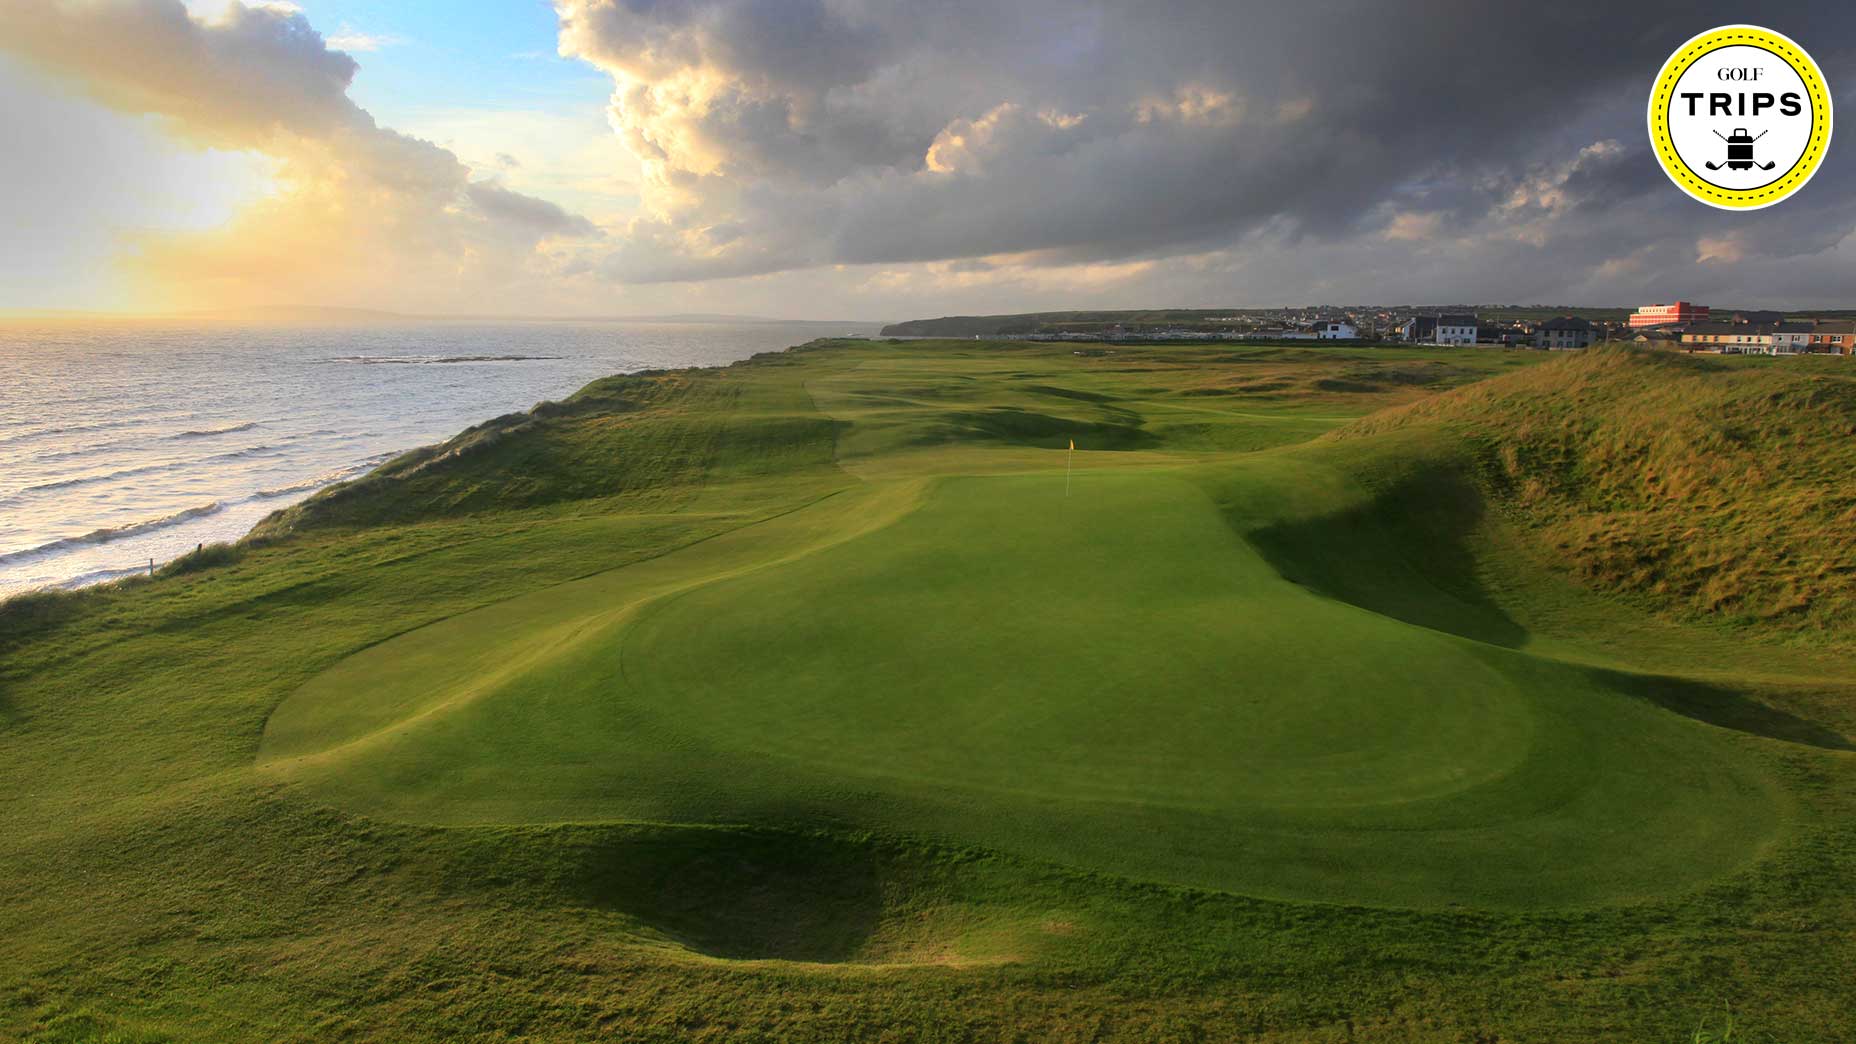 Planning a golf trip to Ireland? Here are 5 regions you need to visit